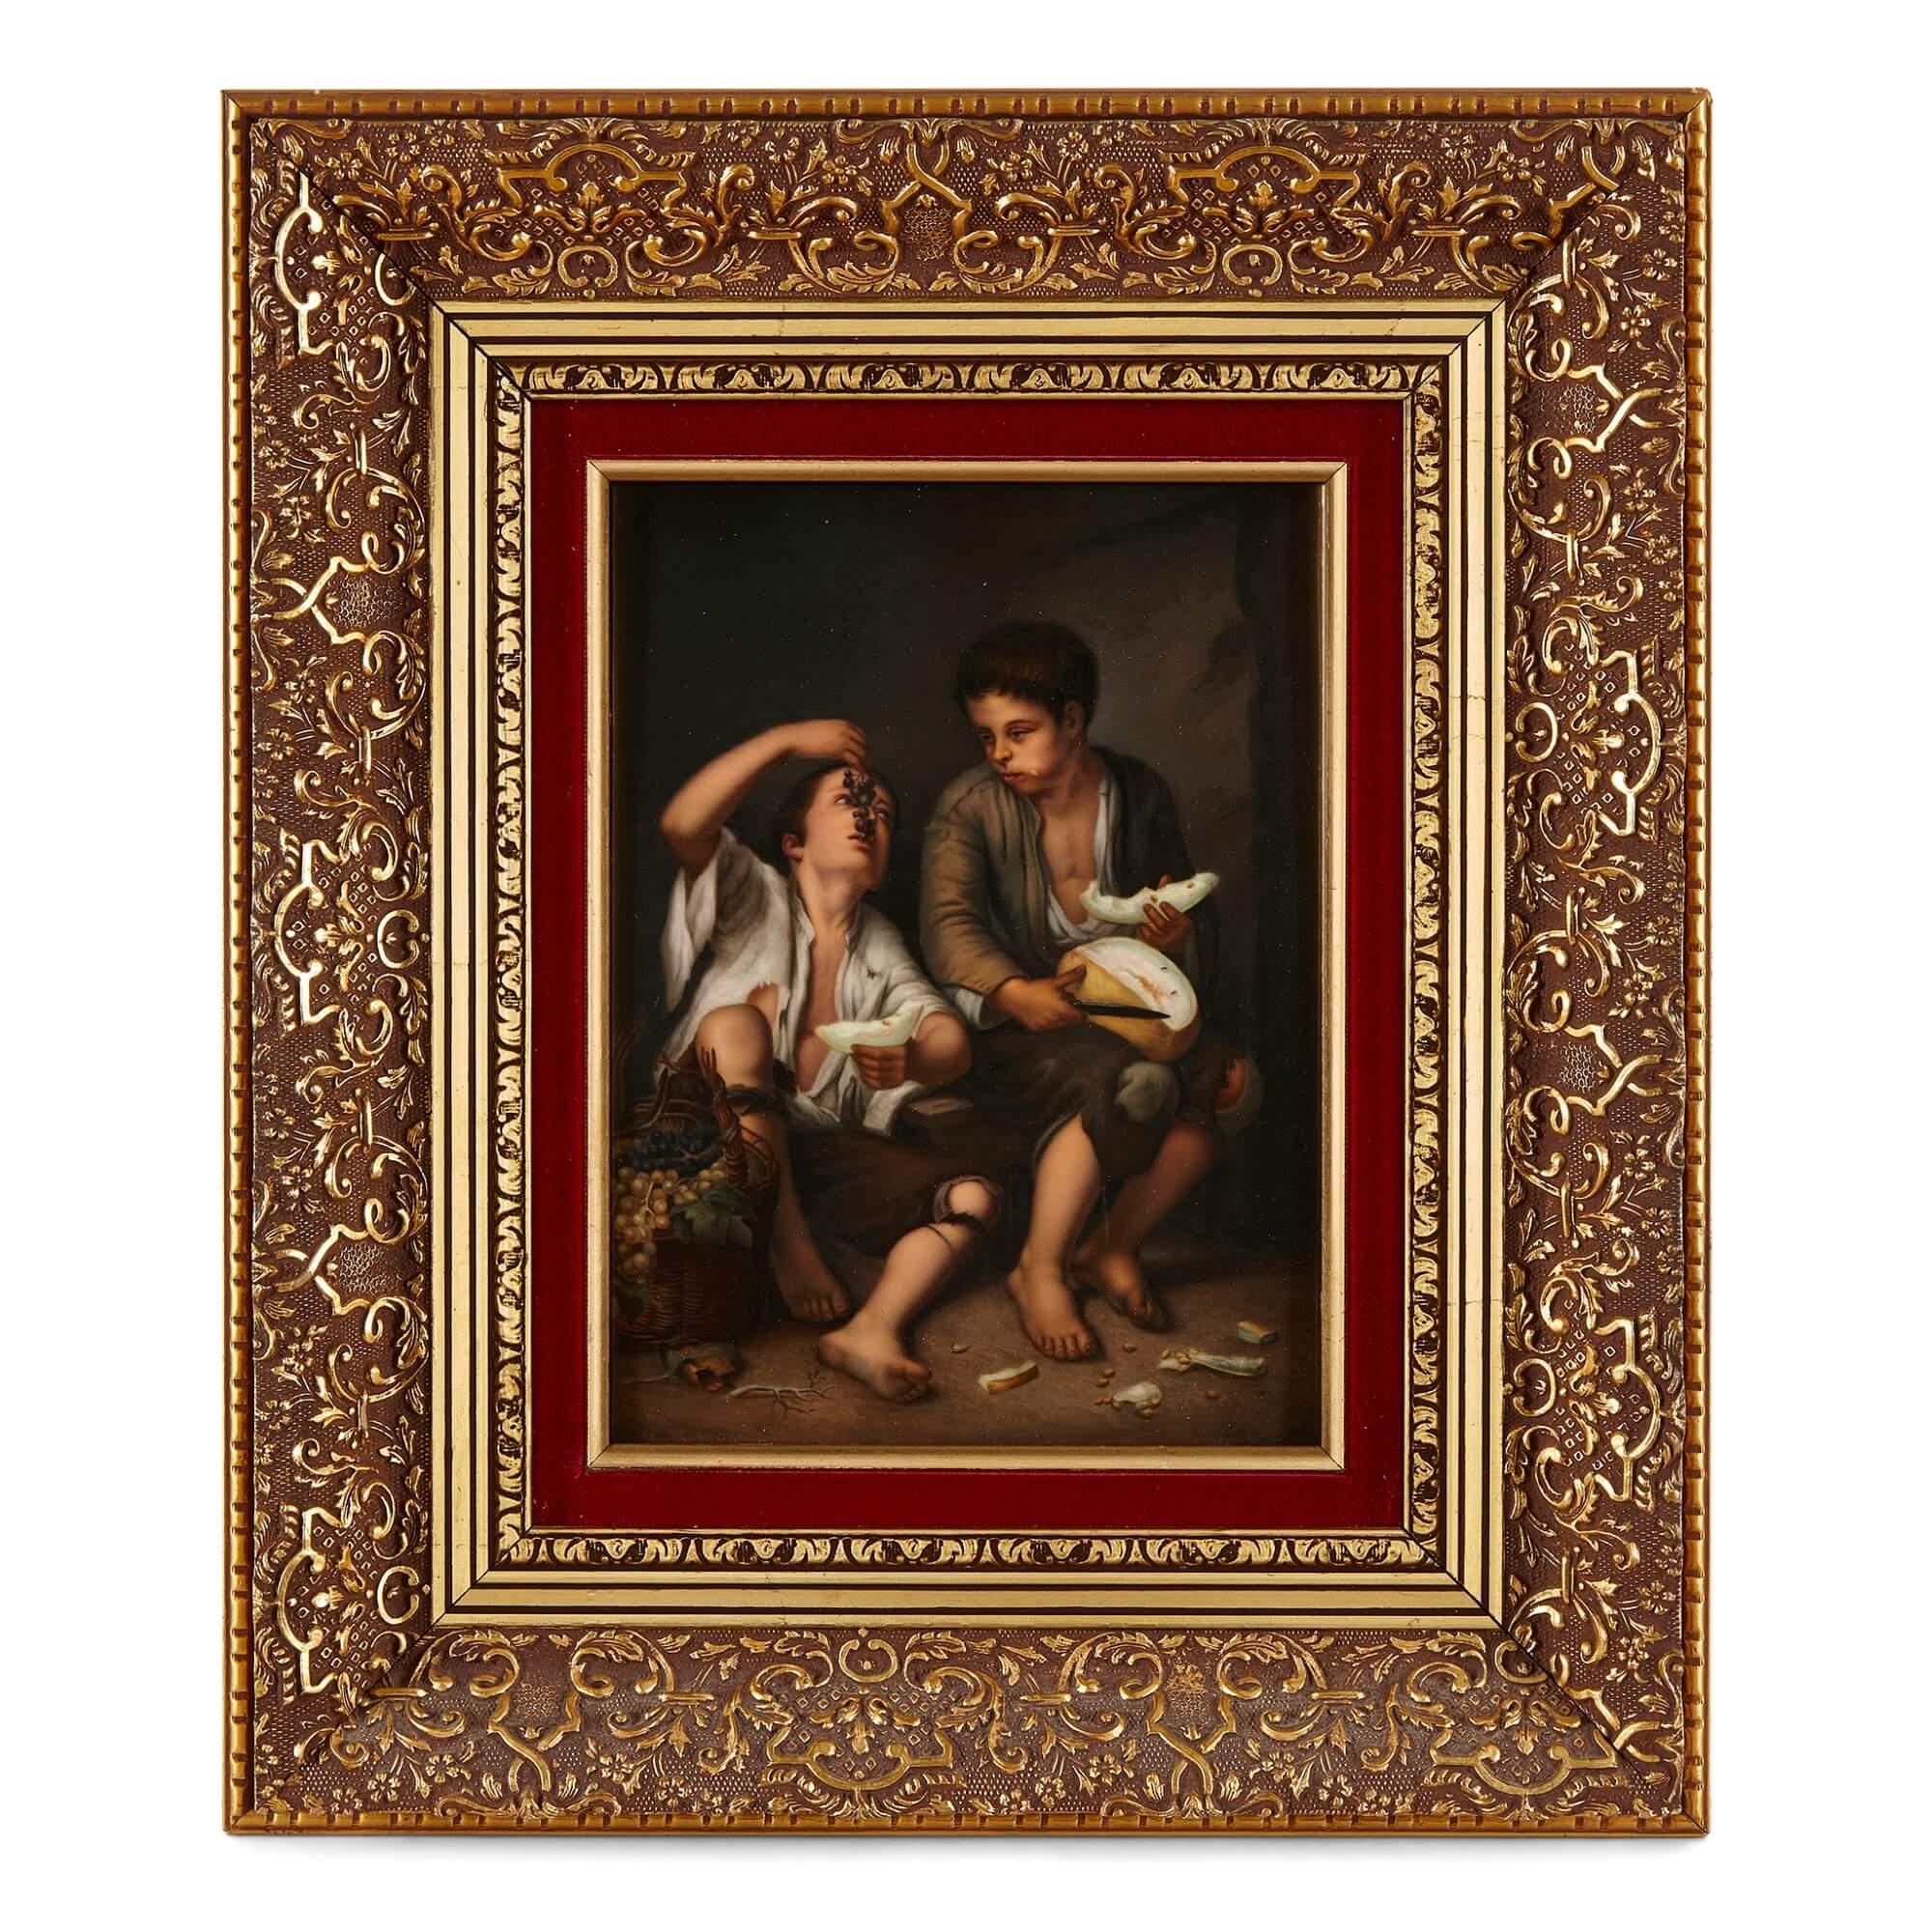 German Pair of KPM Porcelain Plaques After Spanish Baroque Paintings by Murillo For Sale